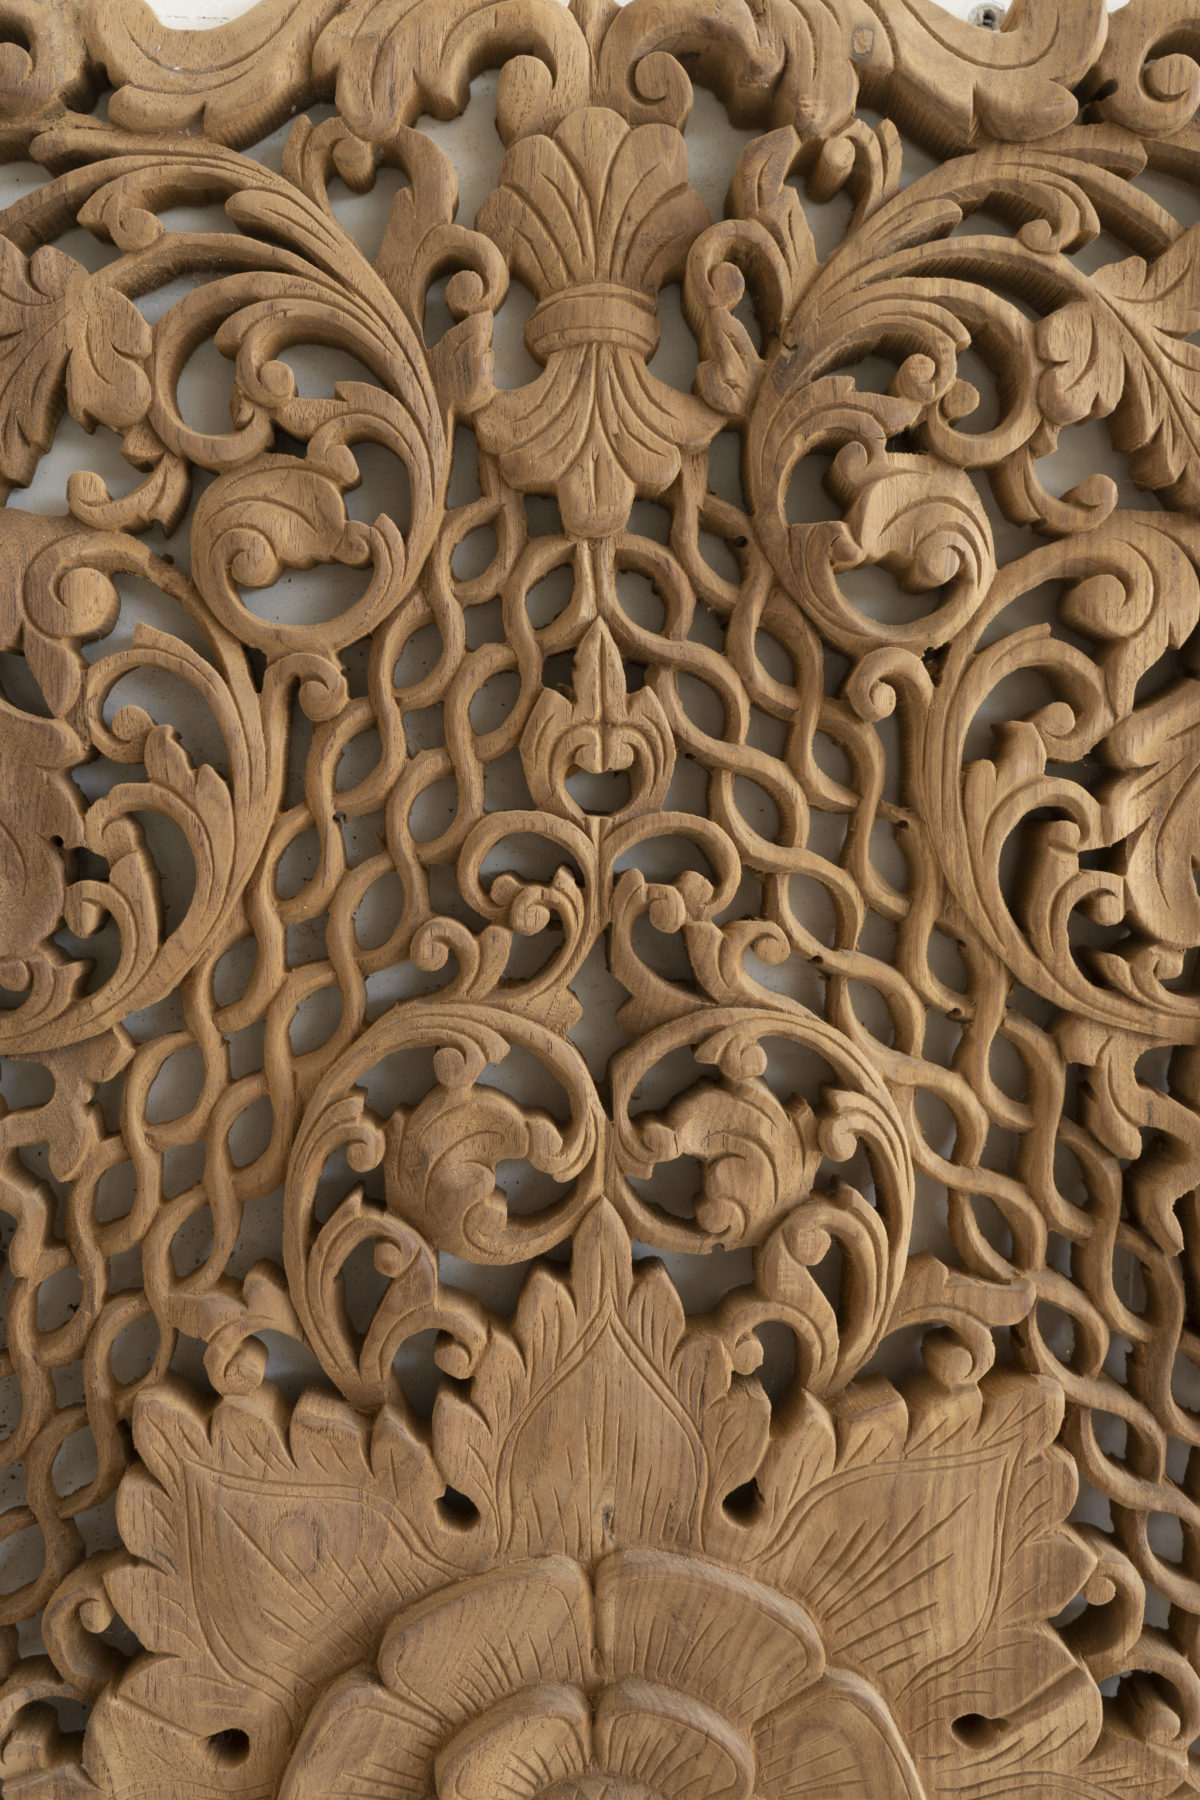 Hand carved wood wall decor